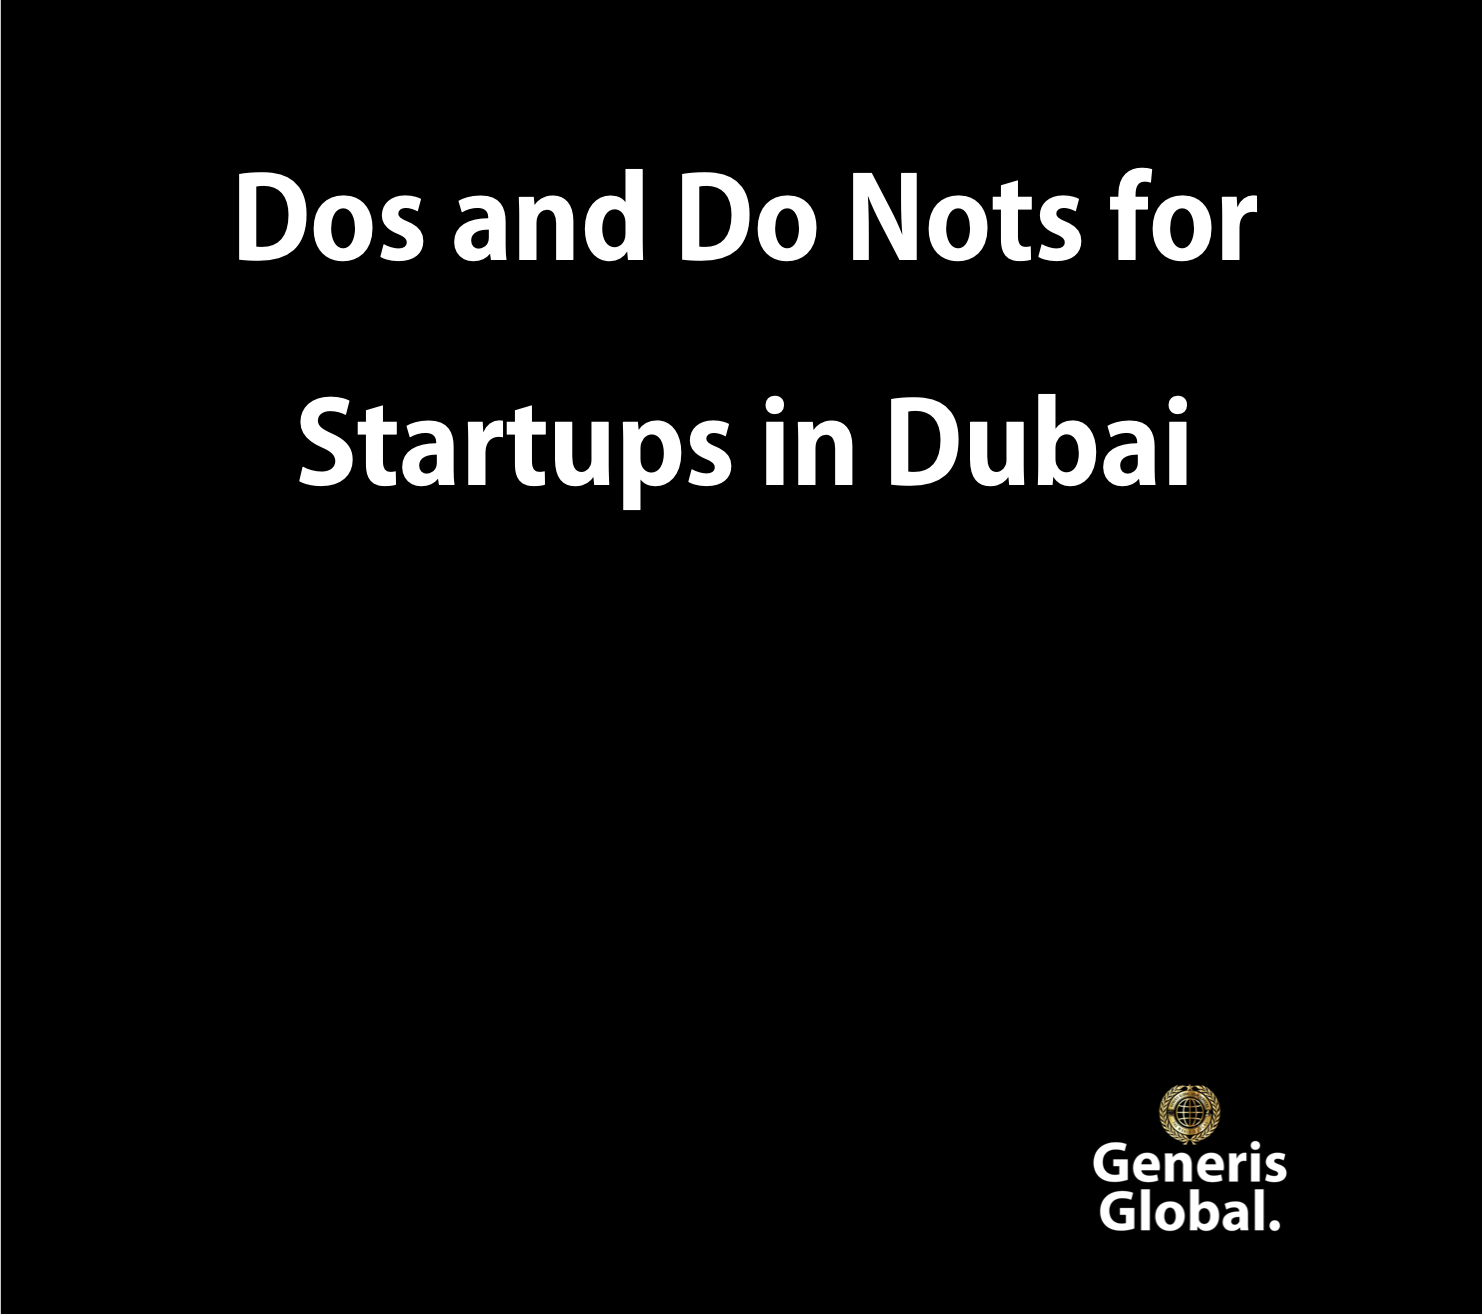 Dos and Do Nots for Startups in Dubai